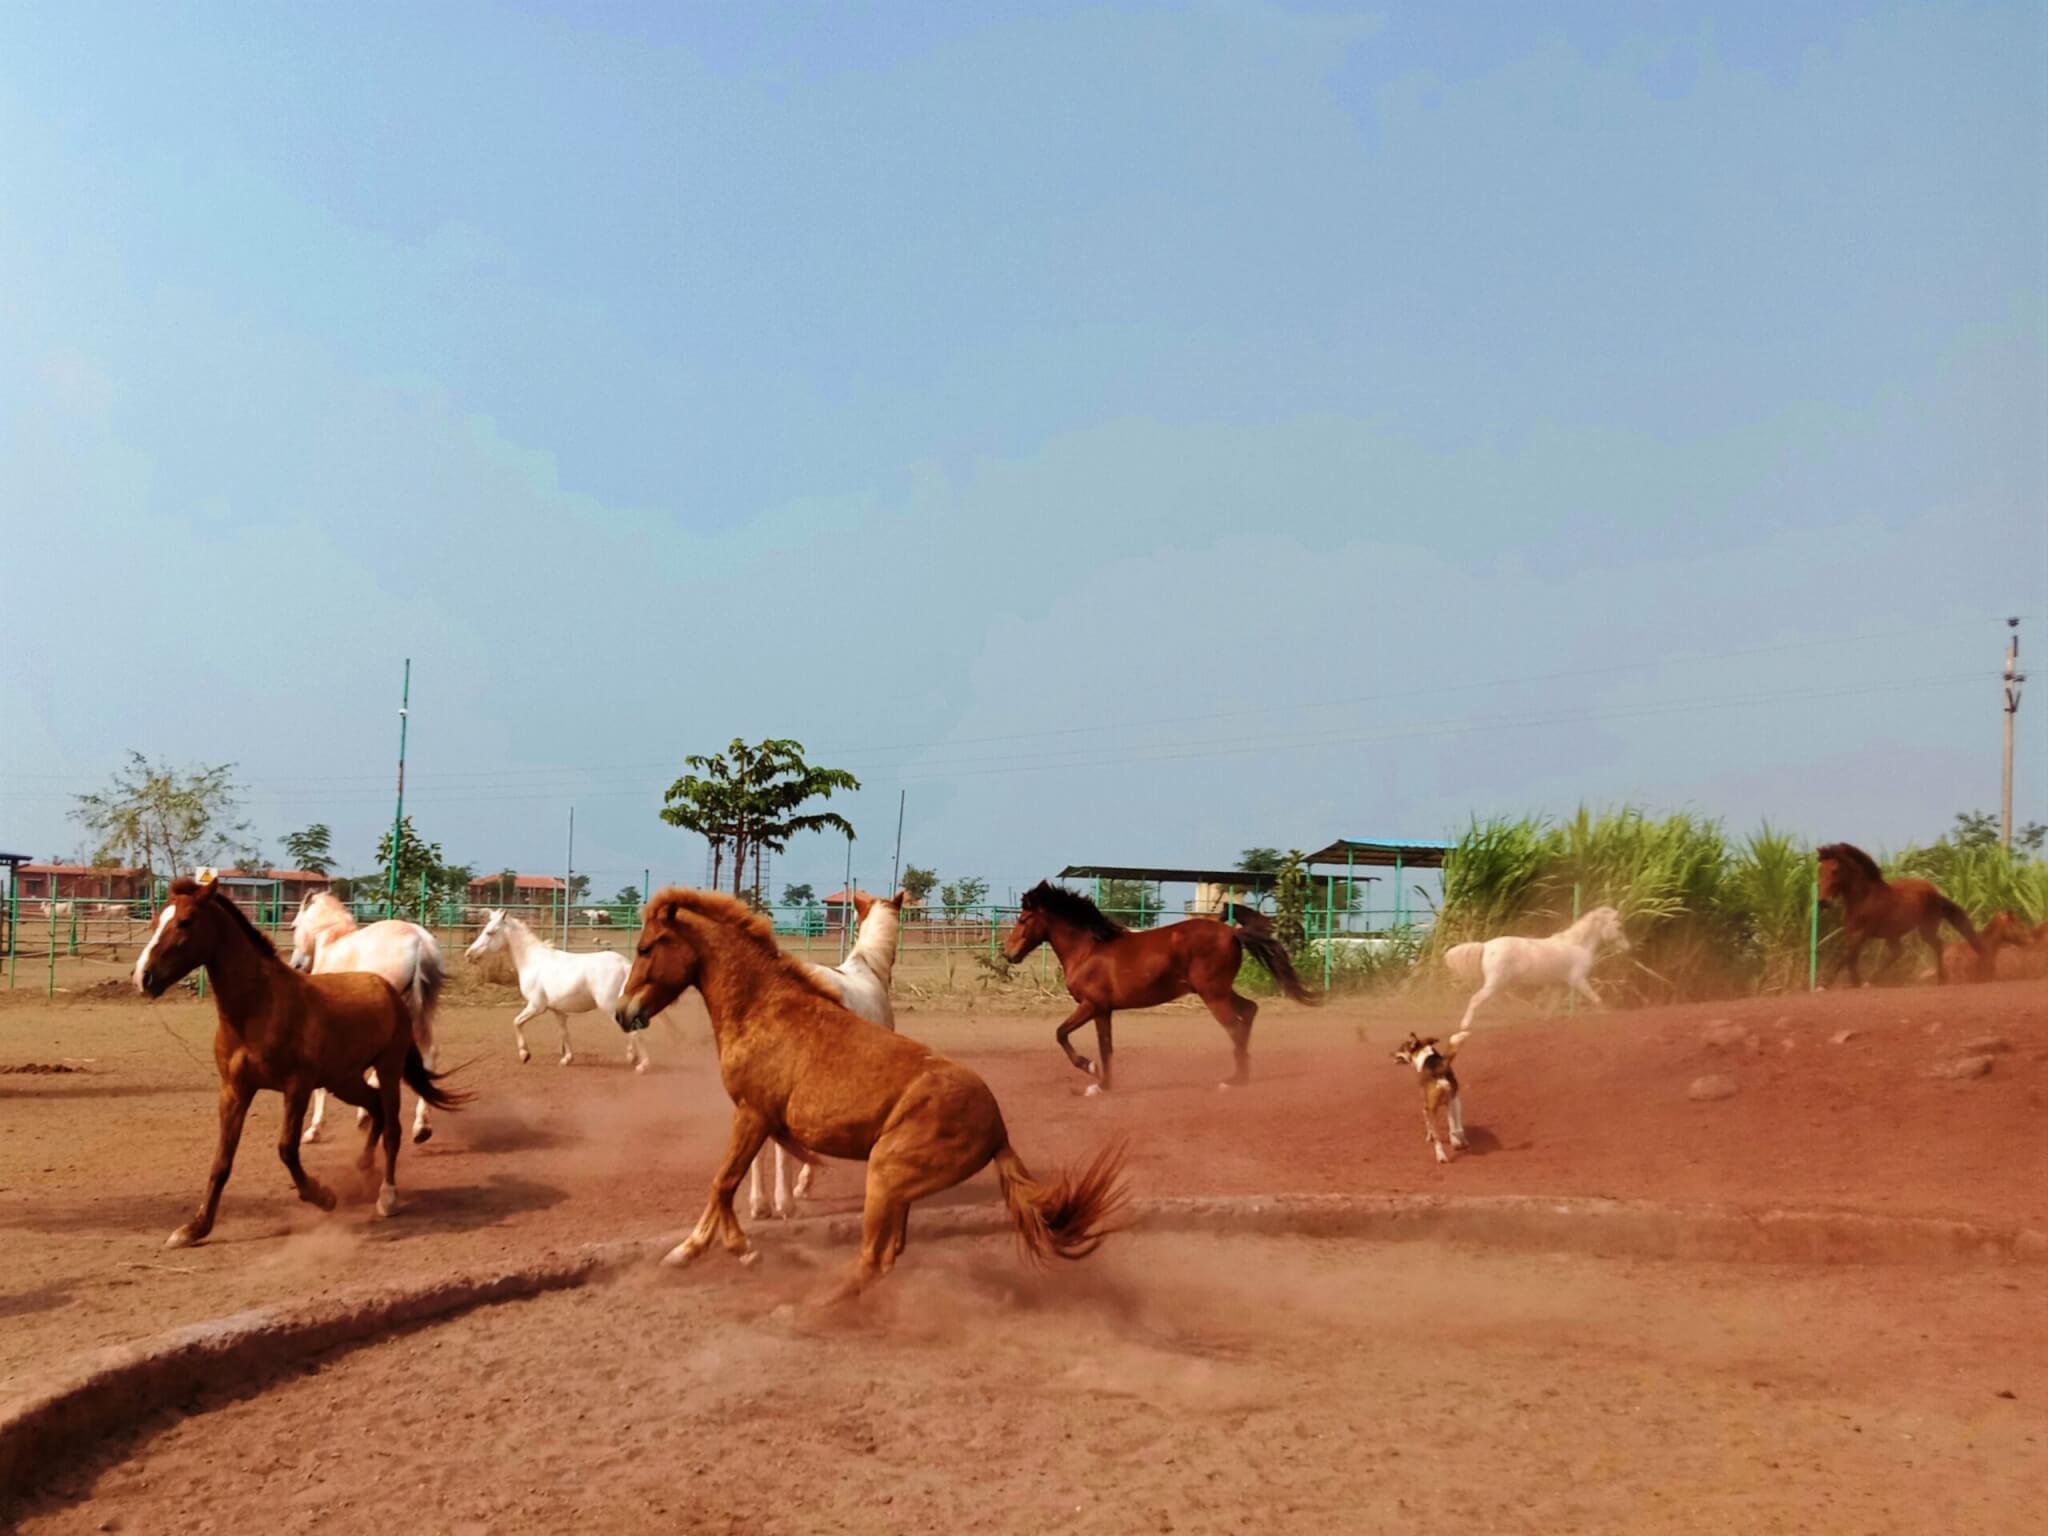 The rescued horses and ponies take advantage of the open space at the sanctuary to run and play.